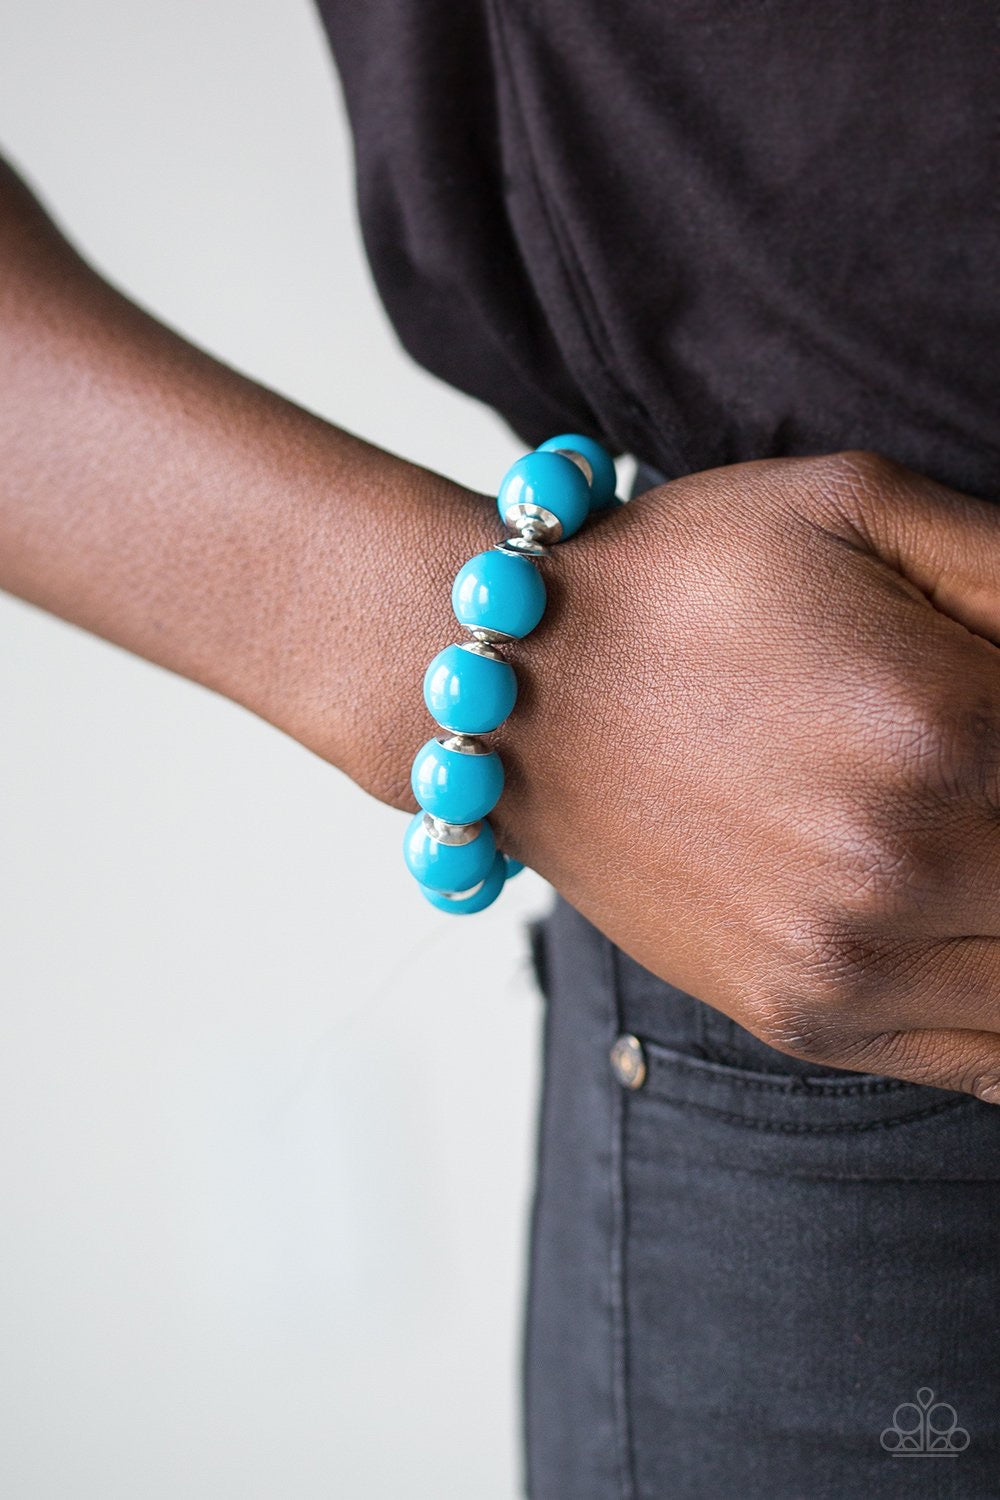 https://themastercollection.myshopify.com/products/candy-shop-sweetheart-blue-bracelet